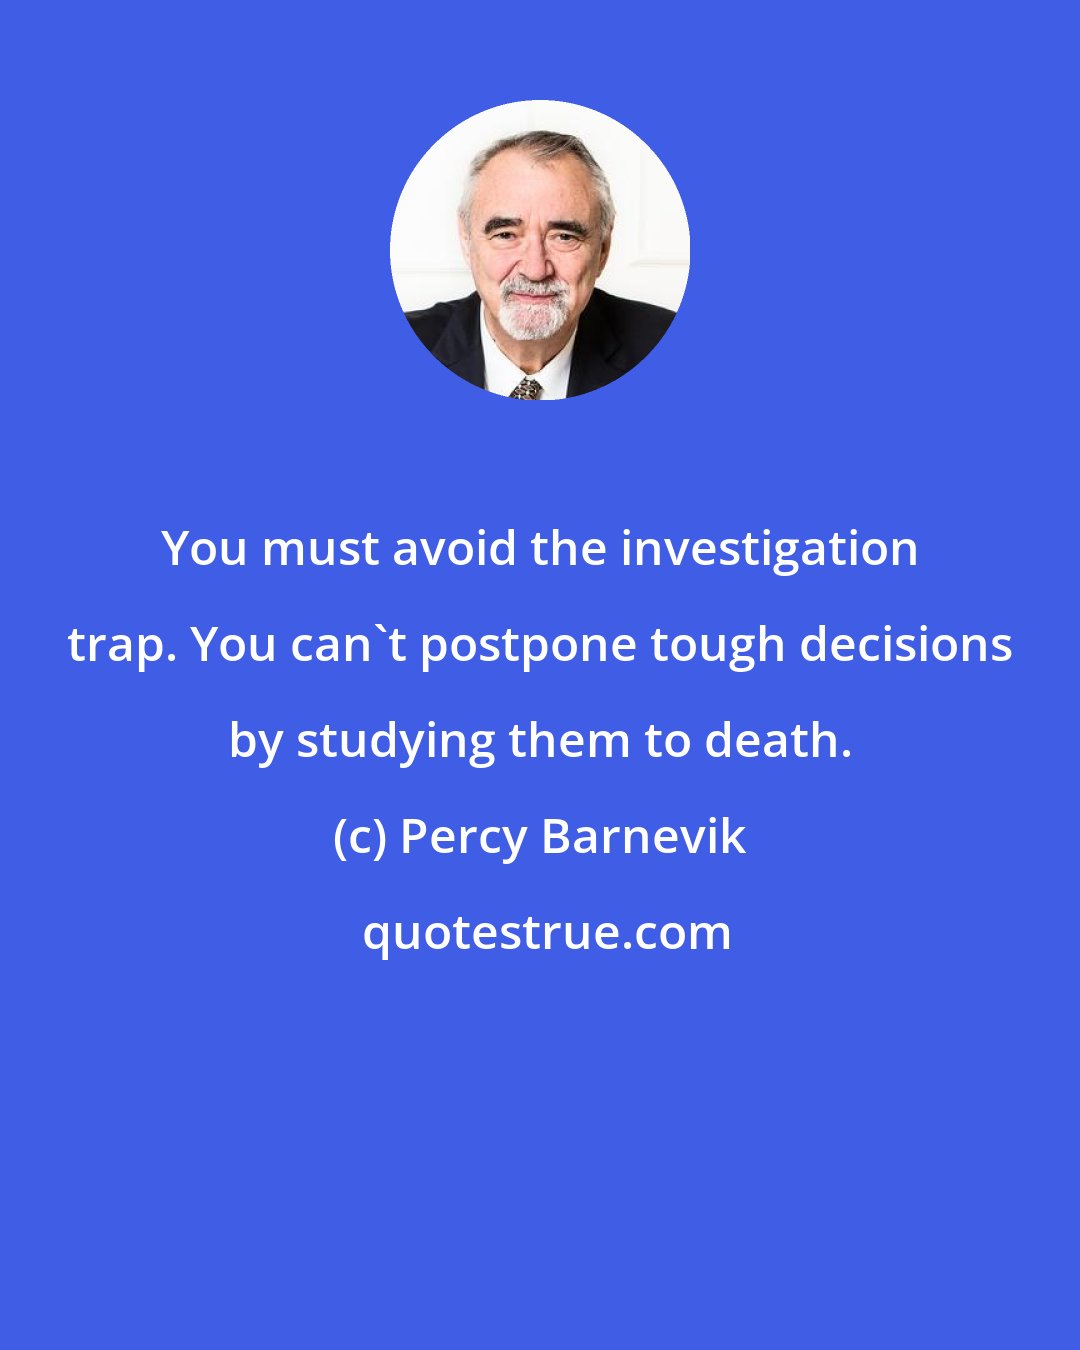 Percy Barnevik: You must avoid the investigation trap. You can't postpone tough decisions by studying them to death.